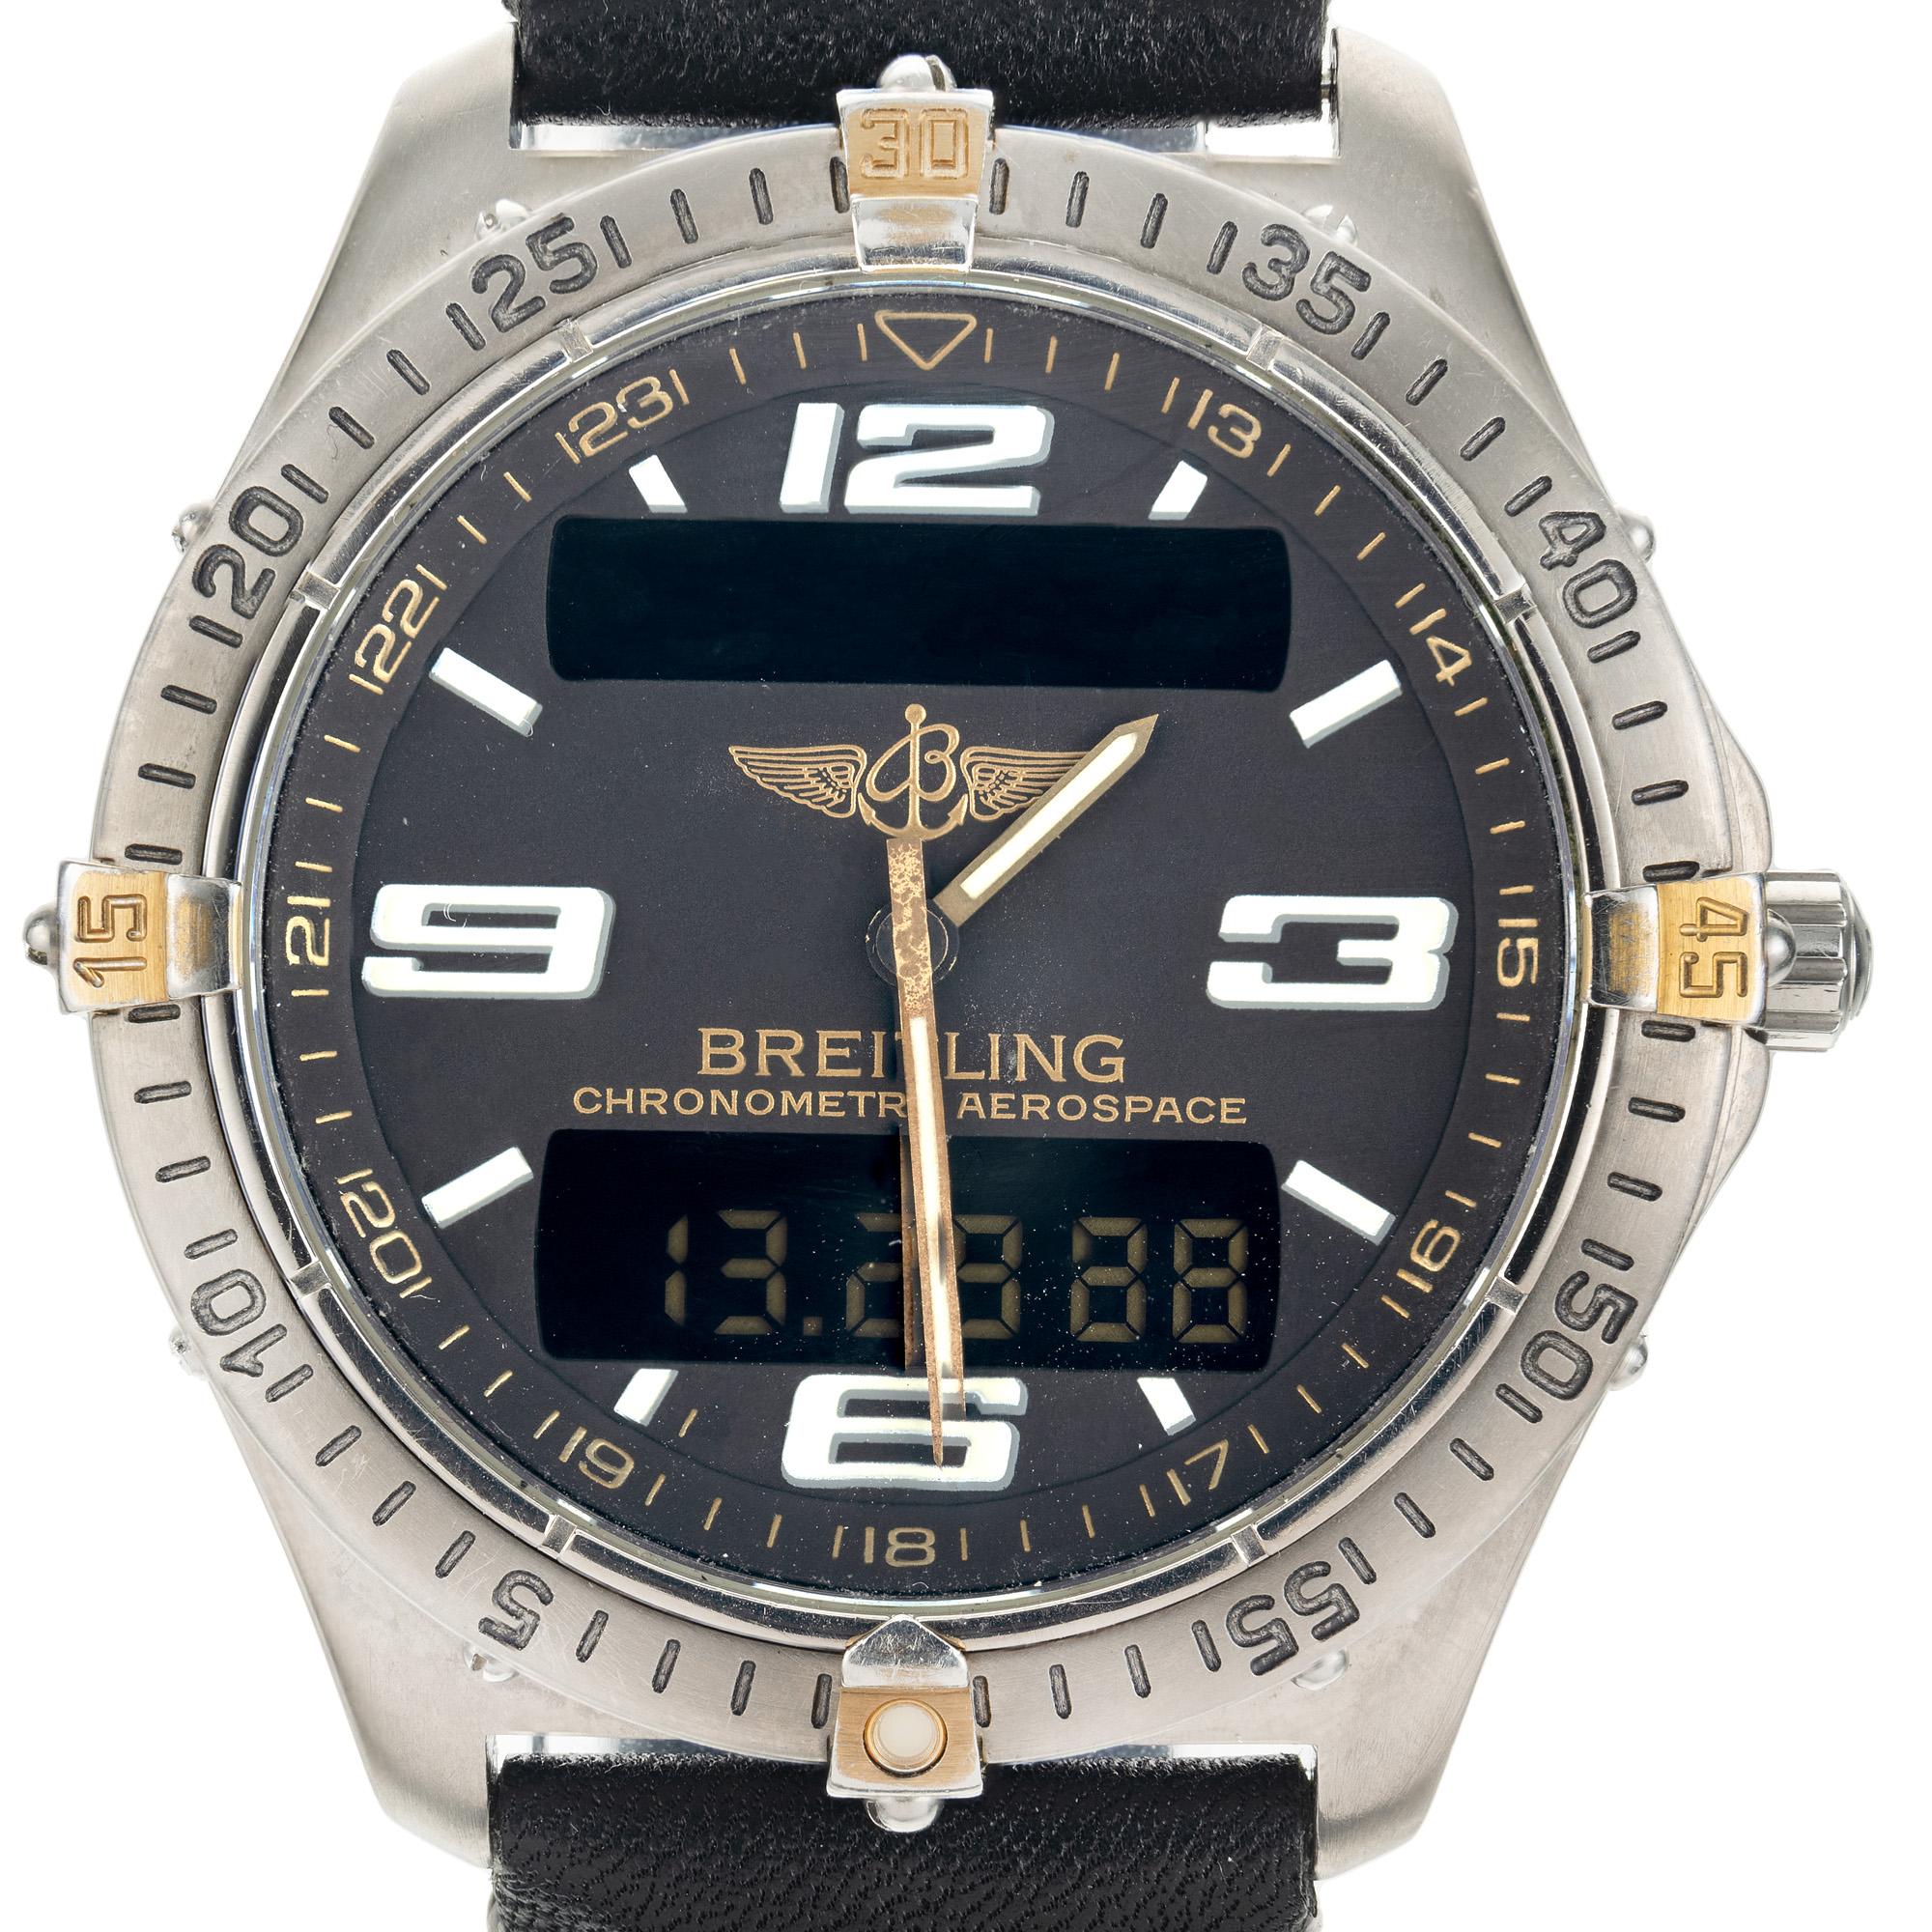 1990's fully serviced and warrantied titanium aerospace wristwatch. Breitling Titanium 18k Chronometer Aerospace Wristwatch, which combines the robustness of titanium with the elegance of 18k gold accents, creating a harmonious contrast and